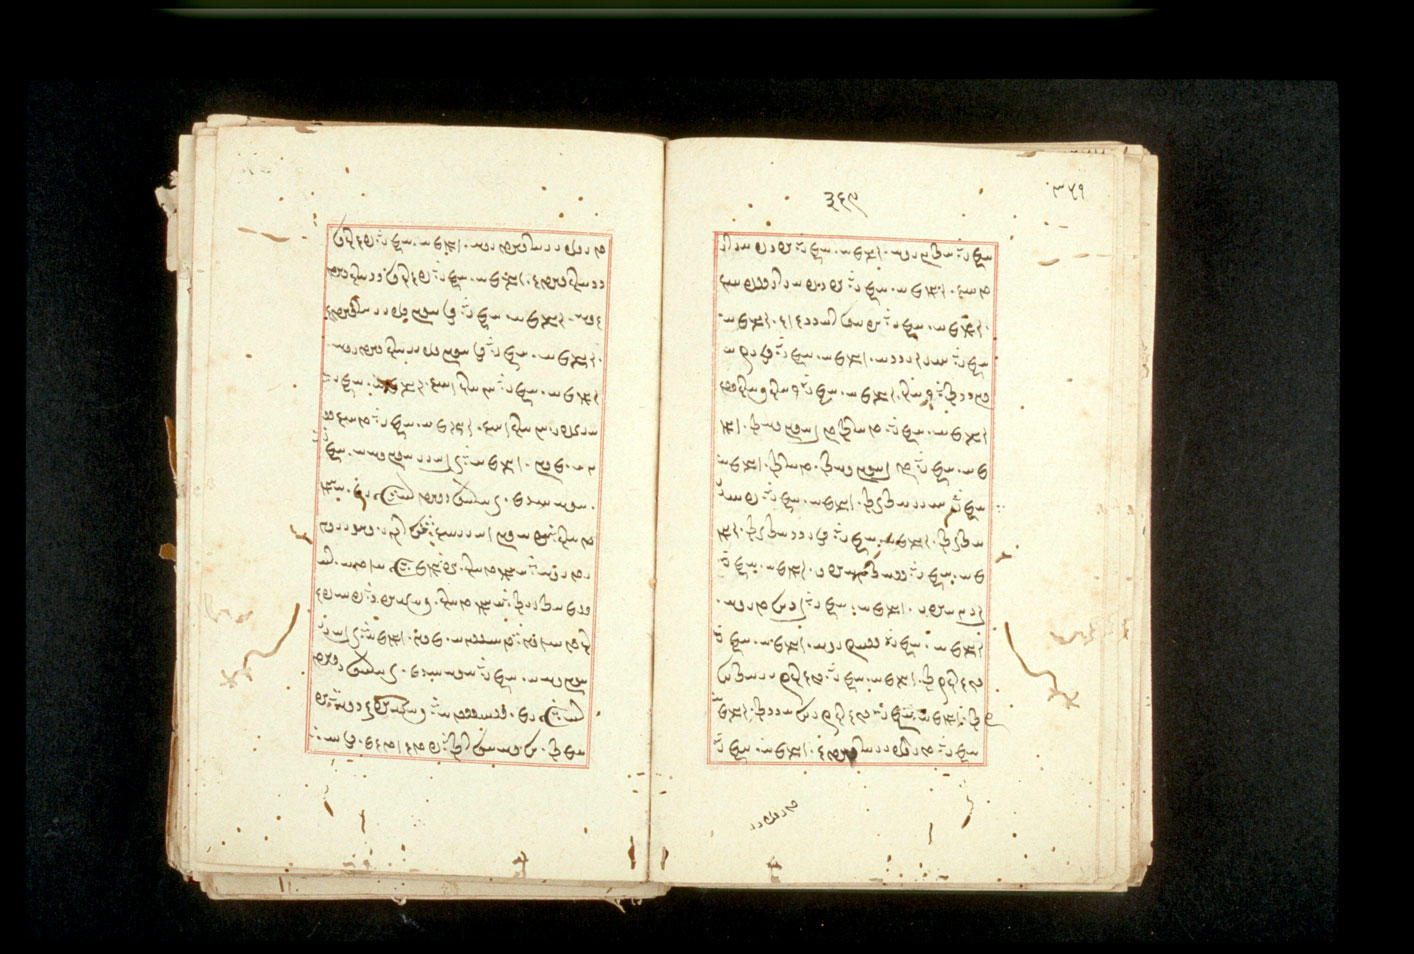 Folios 369v (right) and 370r (left)